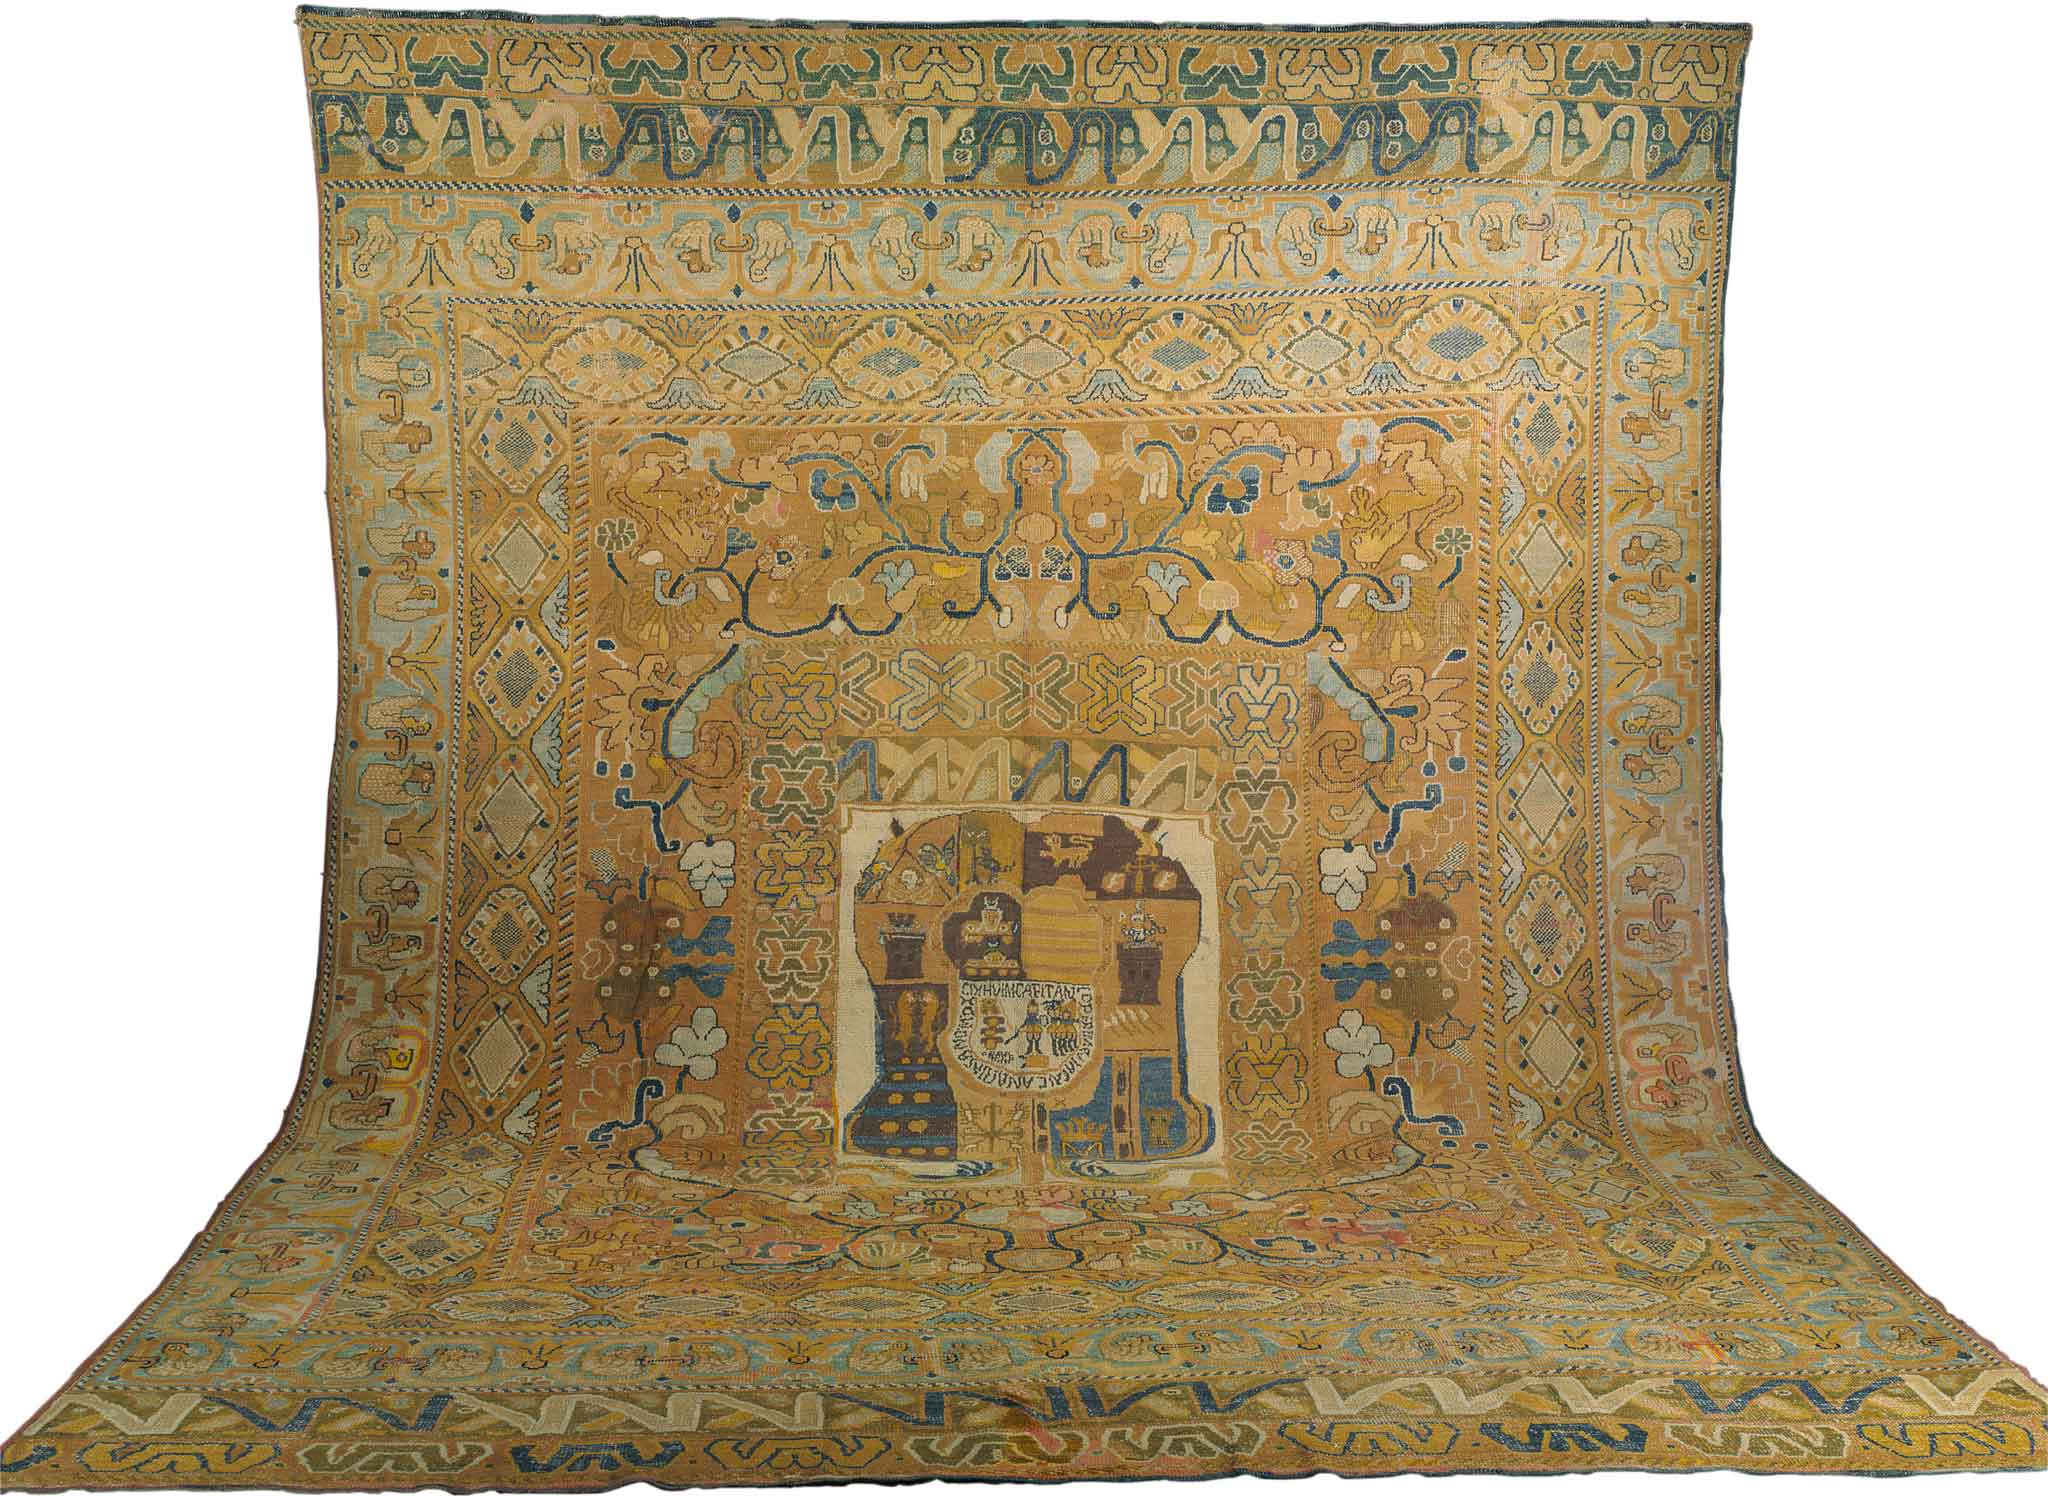 An early 17th century Portuguese Armourial Carpet from the Doris Duke Collection. Sized approximately 19'5" x 14'10". Sold at auction by Christie's for $80,500 (USD) including premium.